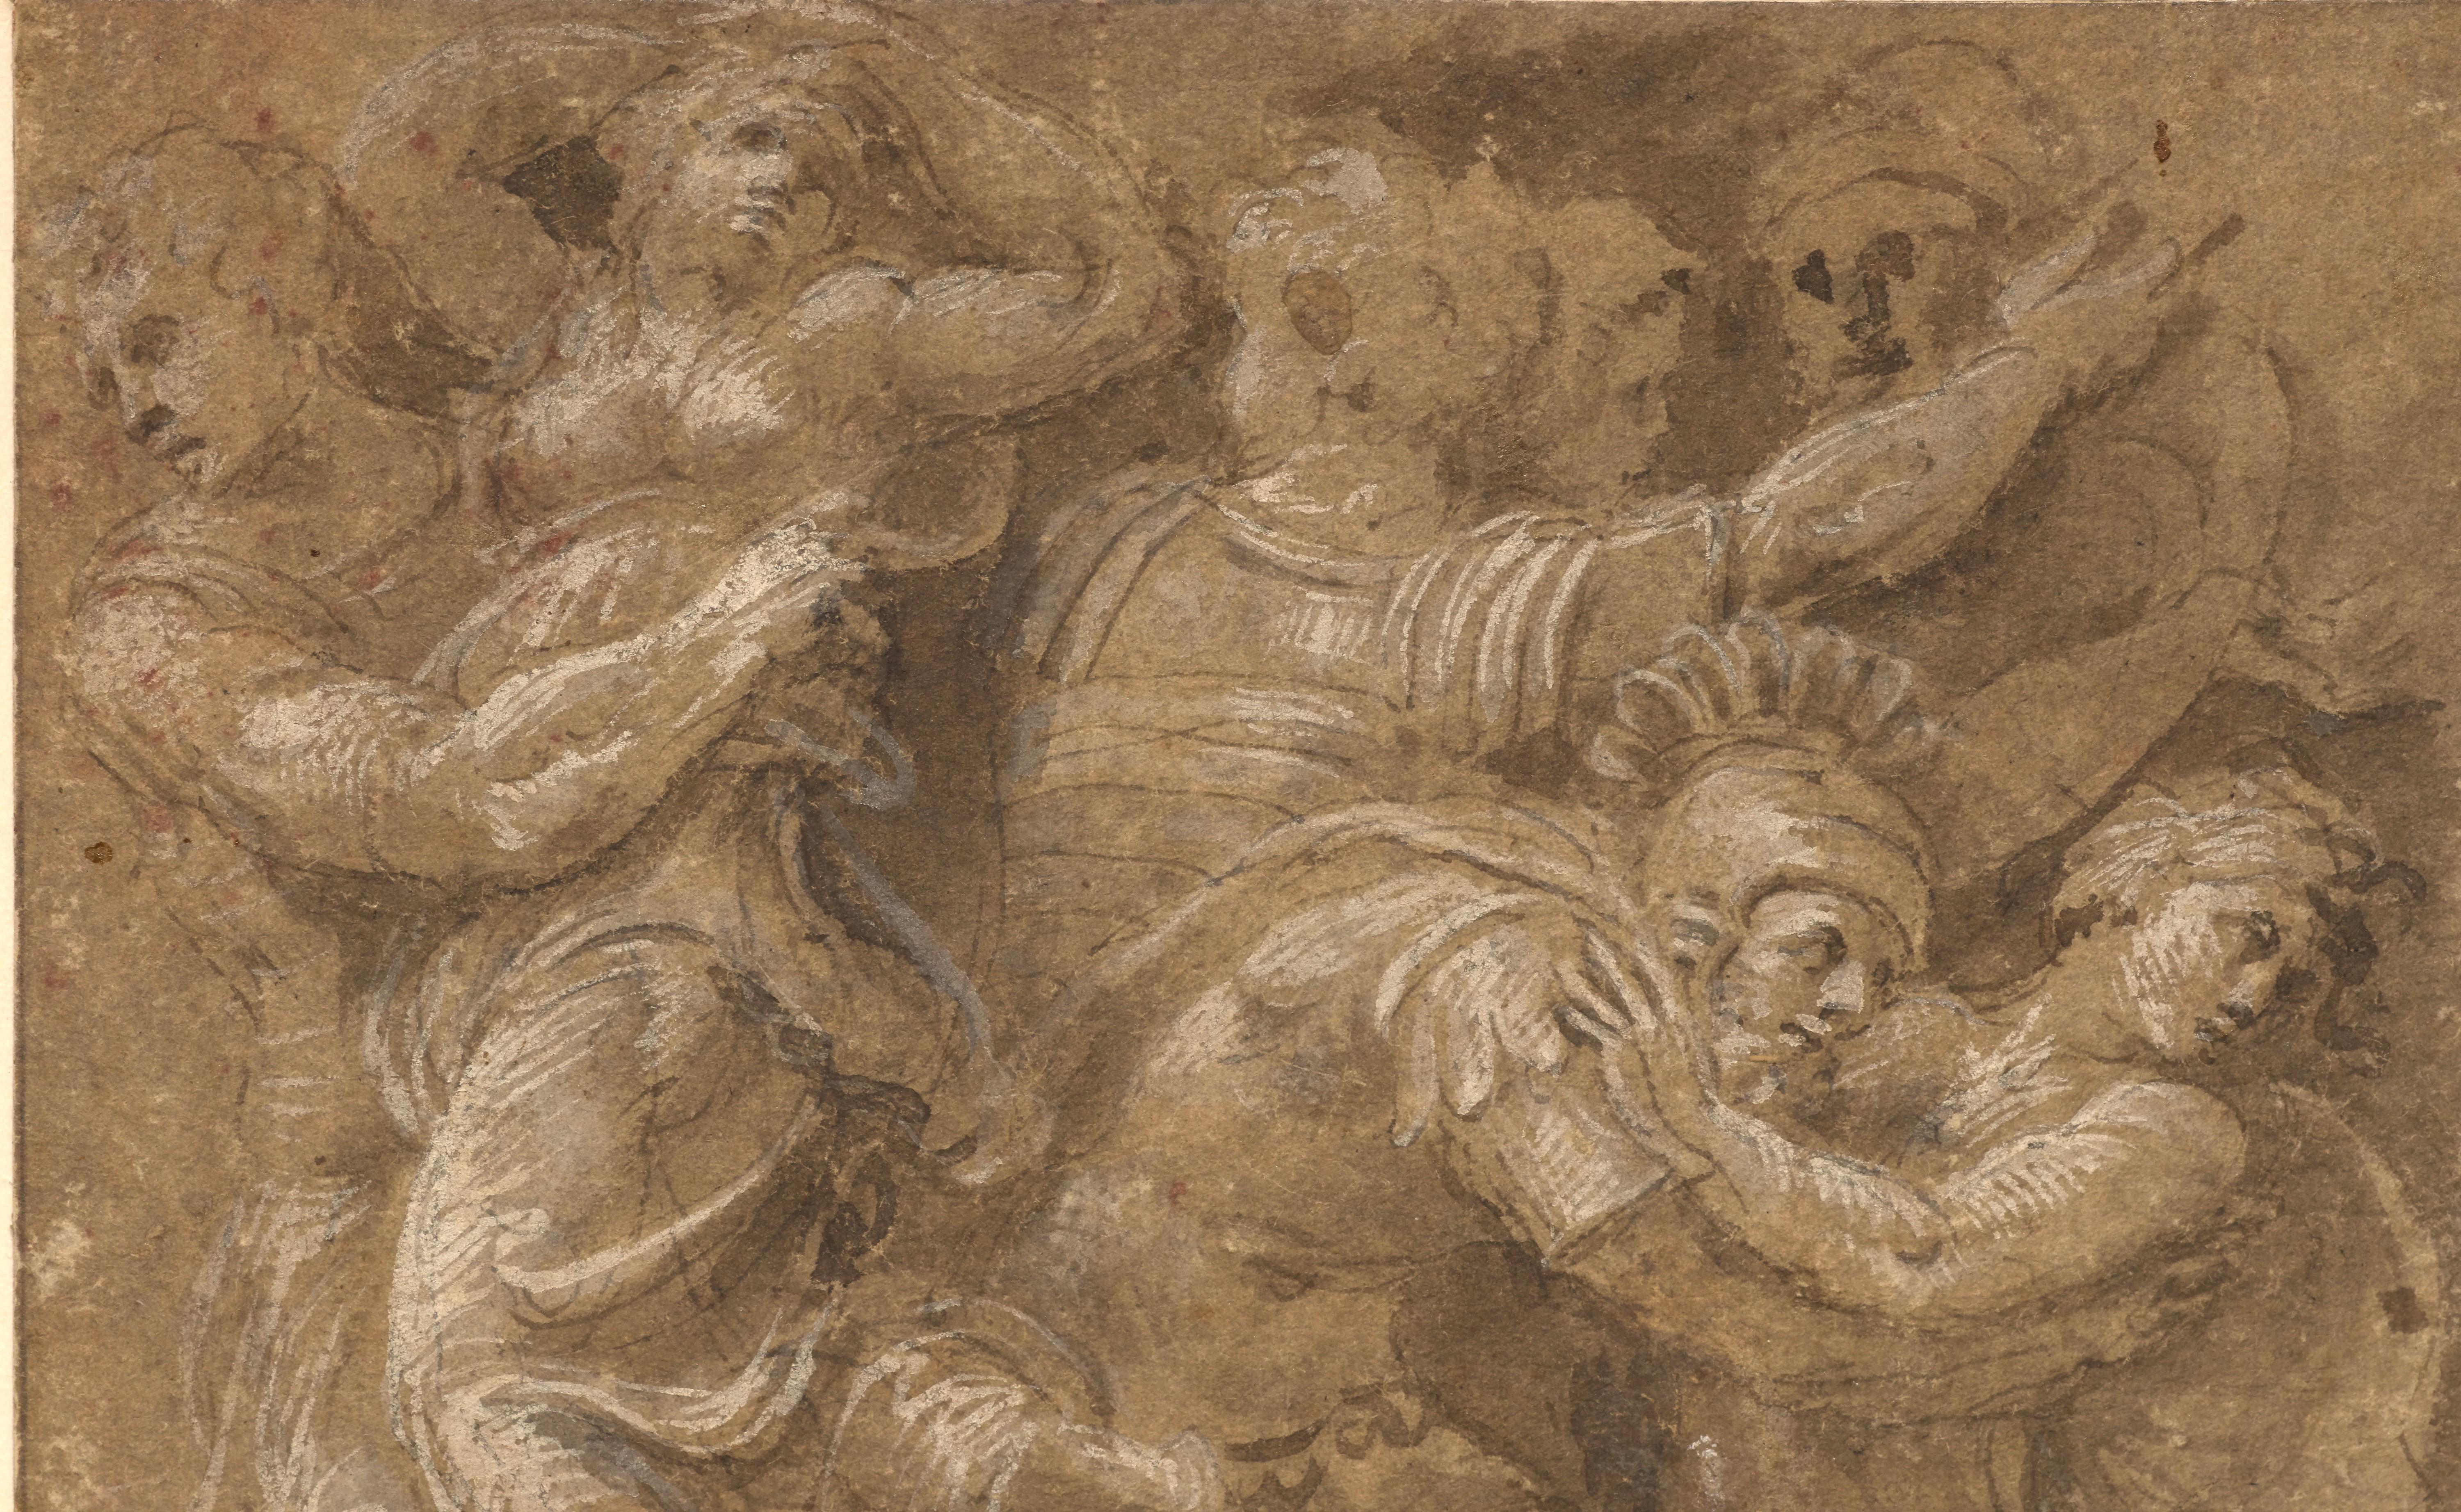 This vigorous drawing has long been attributed to Polidoro da Caravaggio: The Abduction of the Sabine Women is one of the scenes that Polidoro depicted between 1525 and 1527 on the façade of the Milesi Palazzo in Rome. However, the proximity to